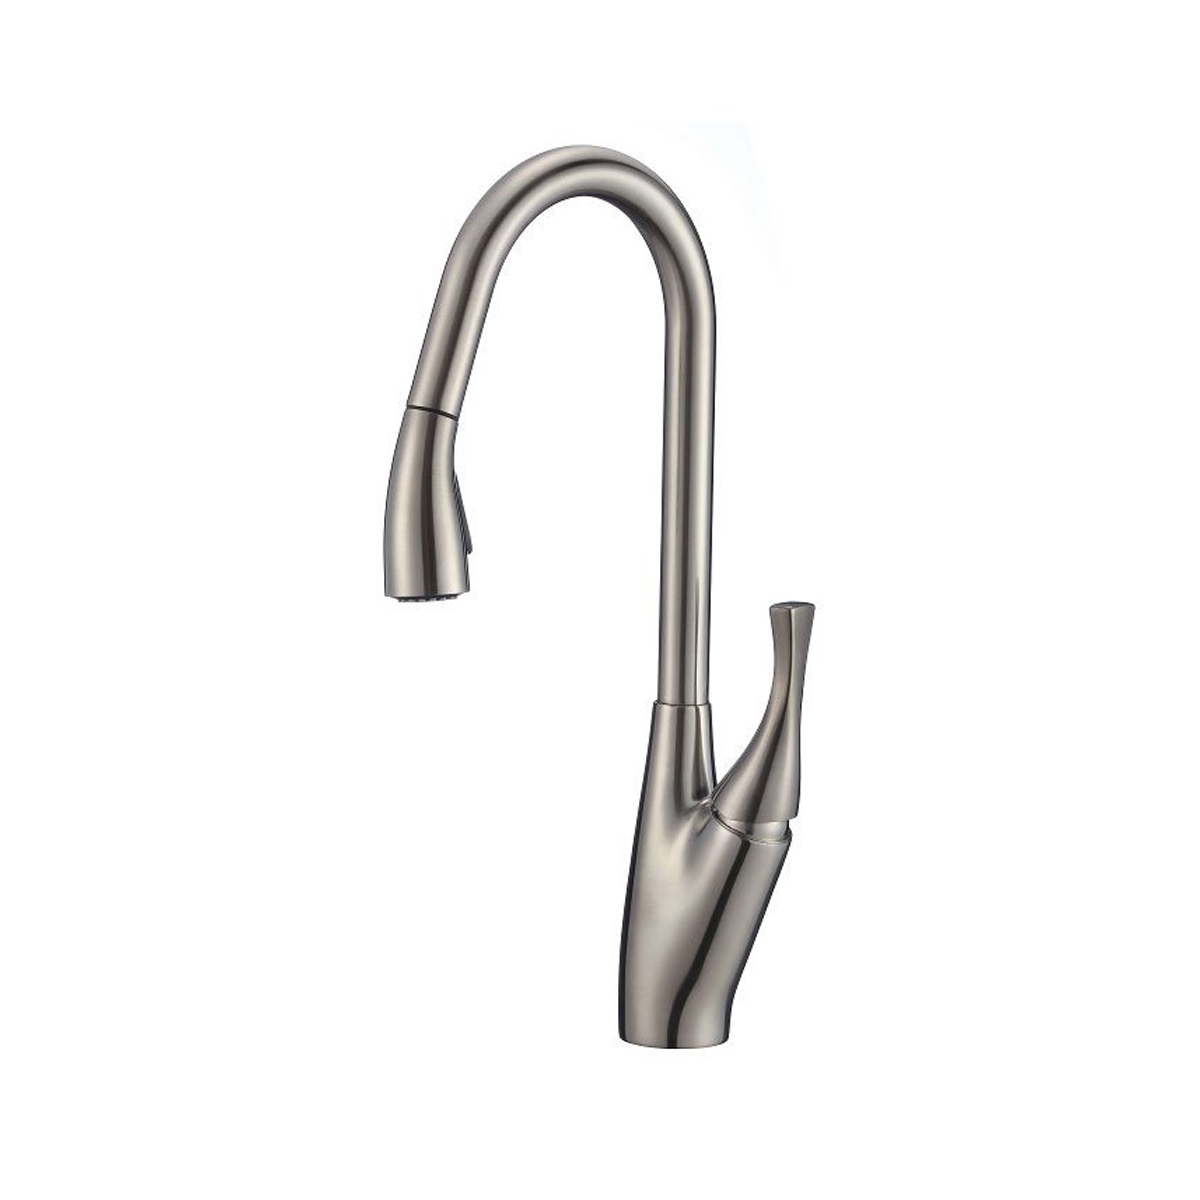 Pelican Int'l Fountain Series PL-8224 Single Hole Pull Down Kitchen Faucet In Brushed Nickel